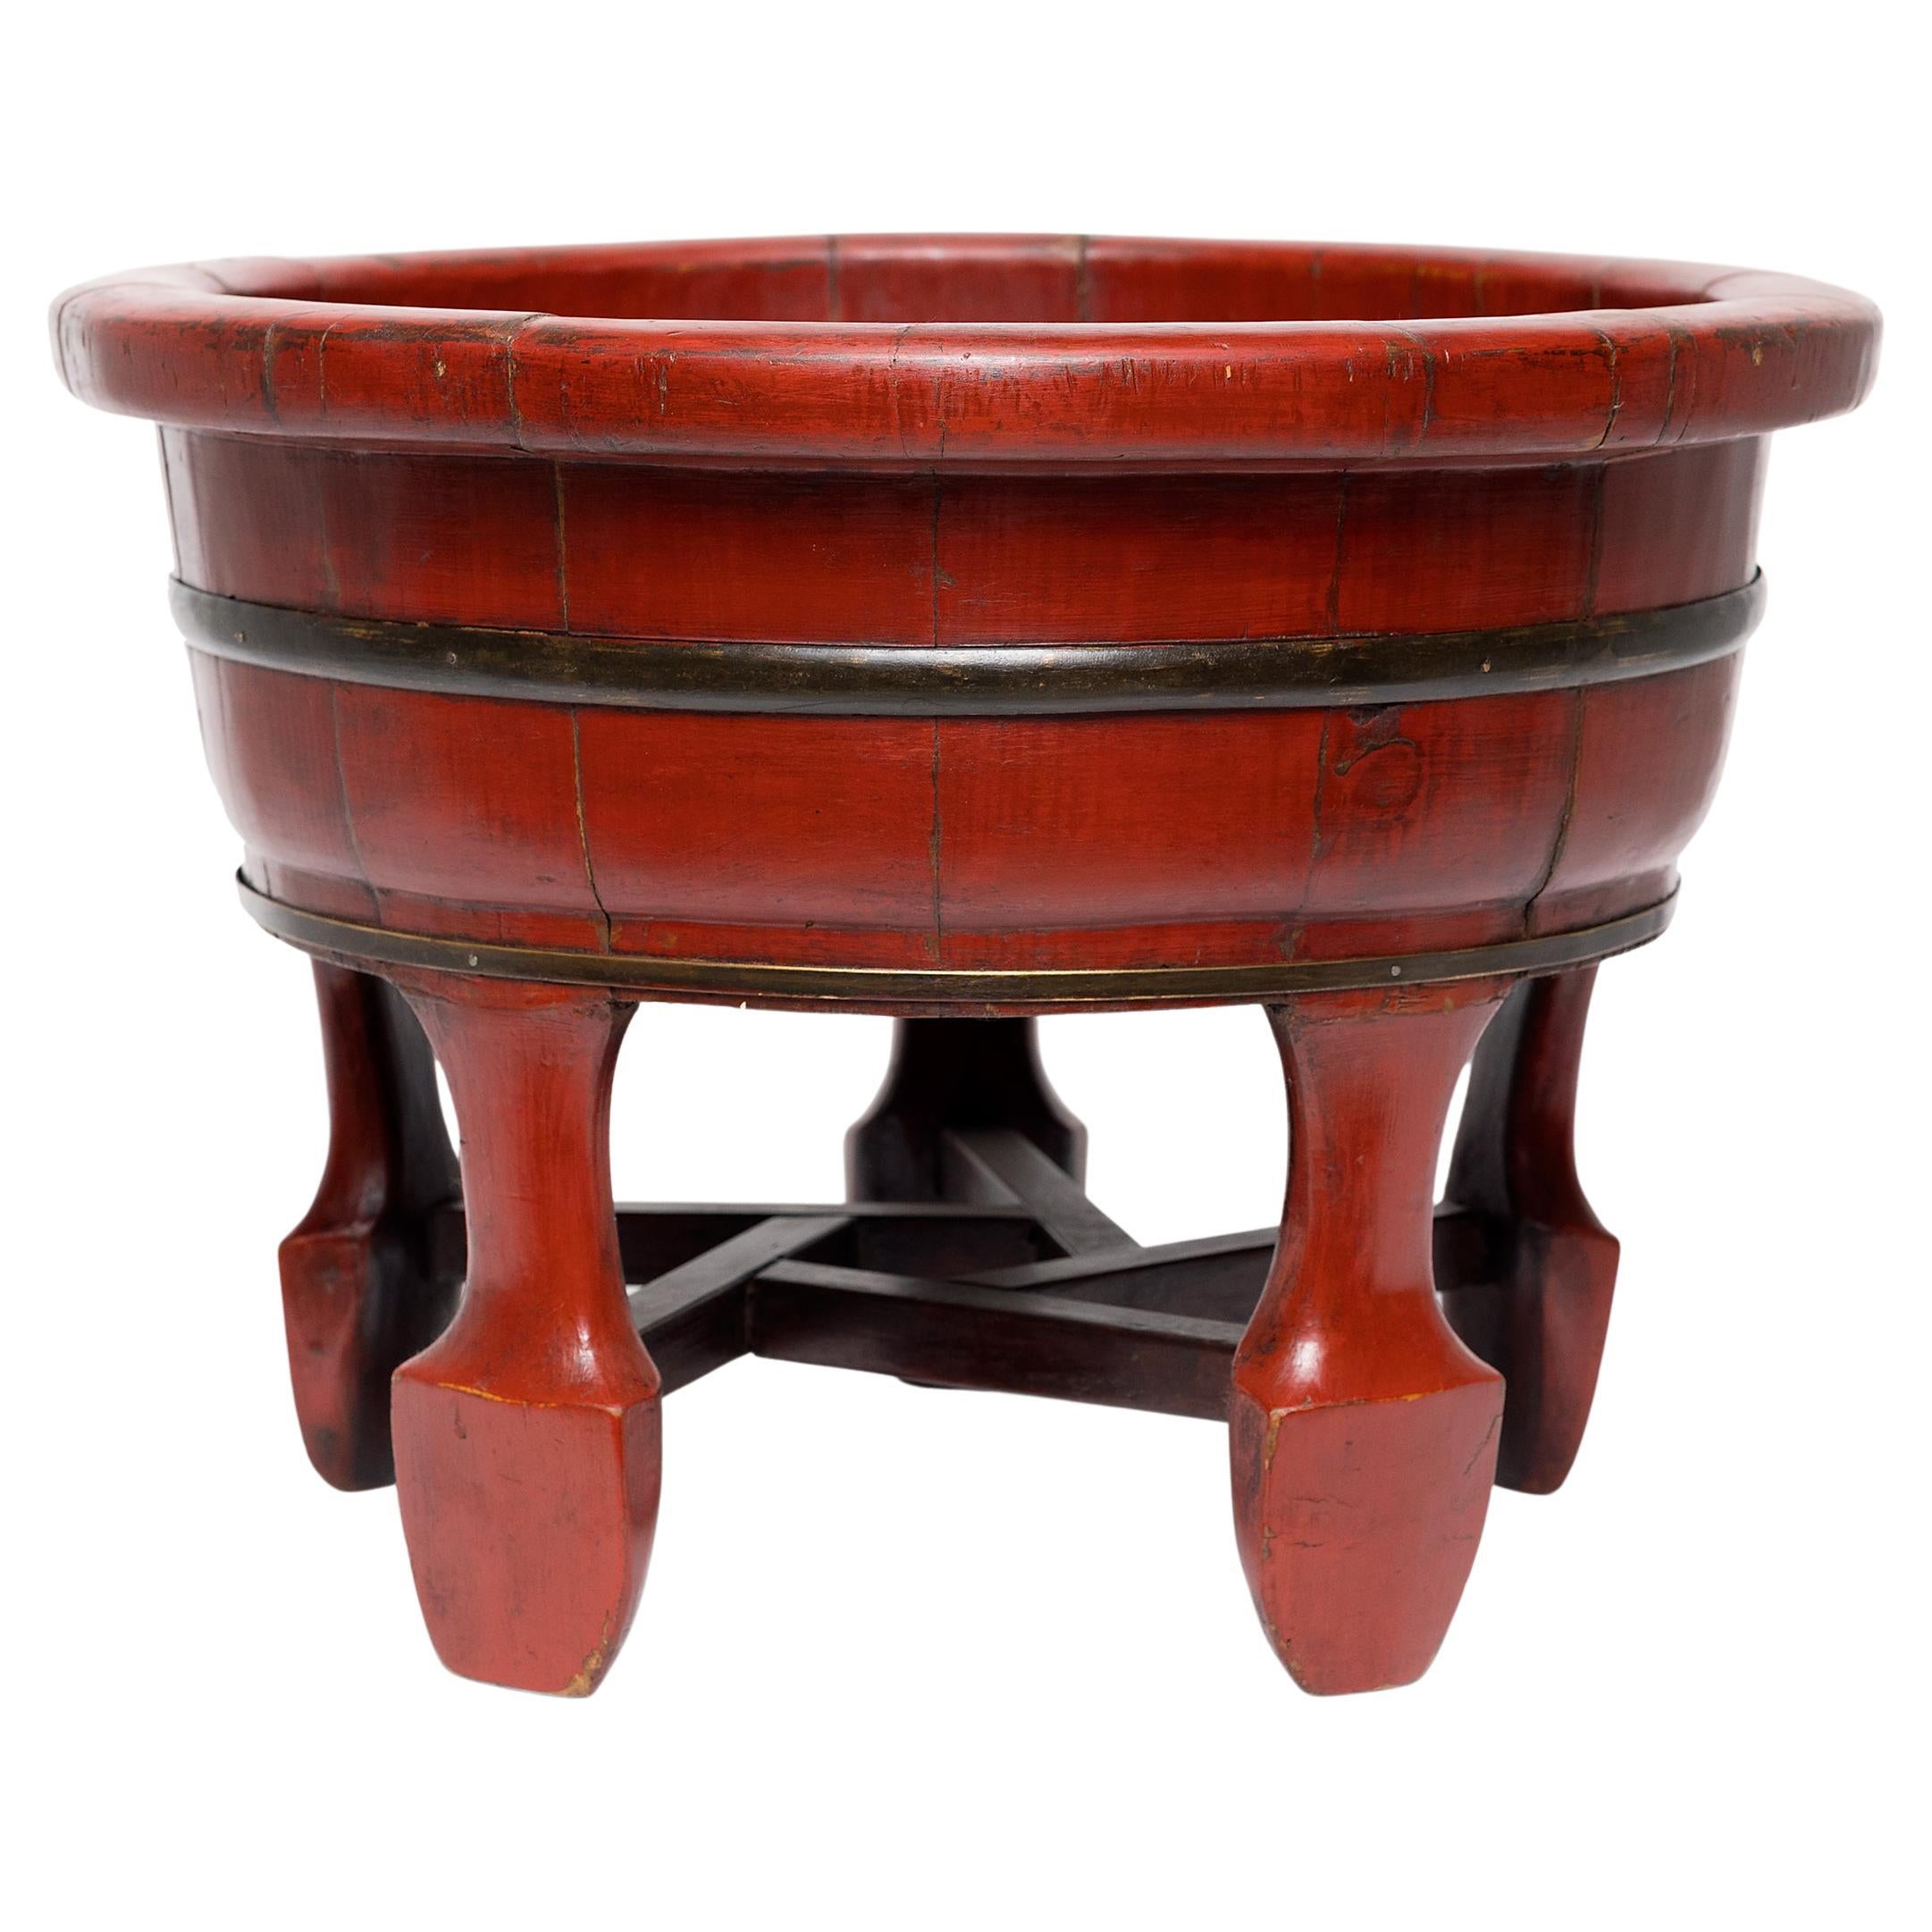 Chinese Footed Red Lacquer Wash Basin, c. 1880